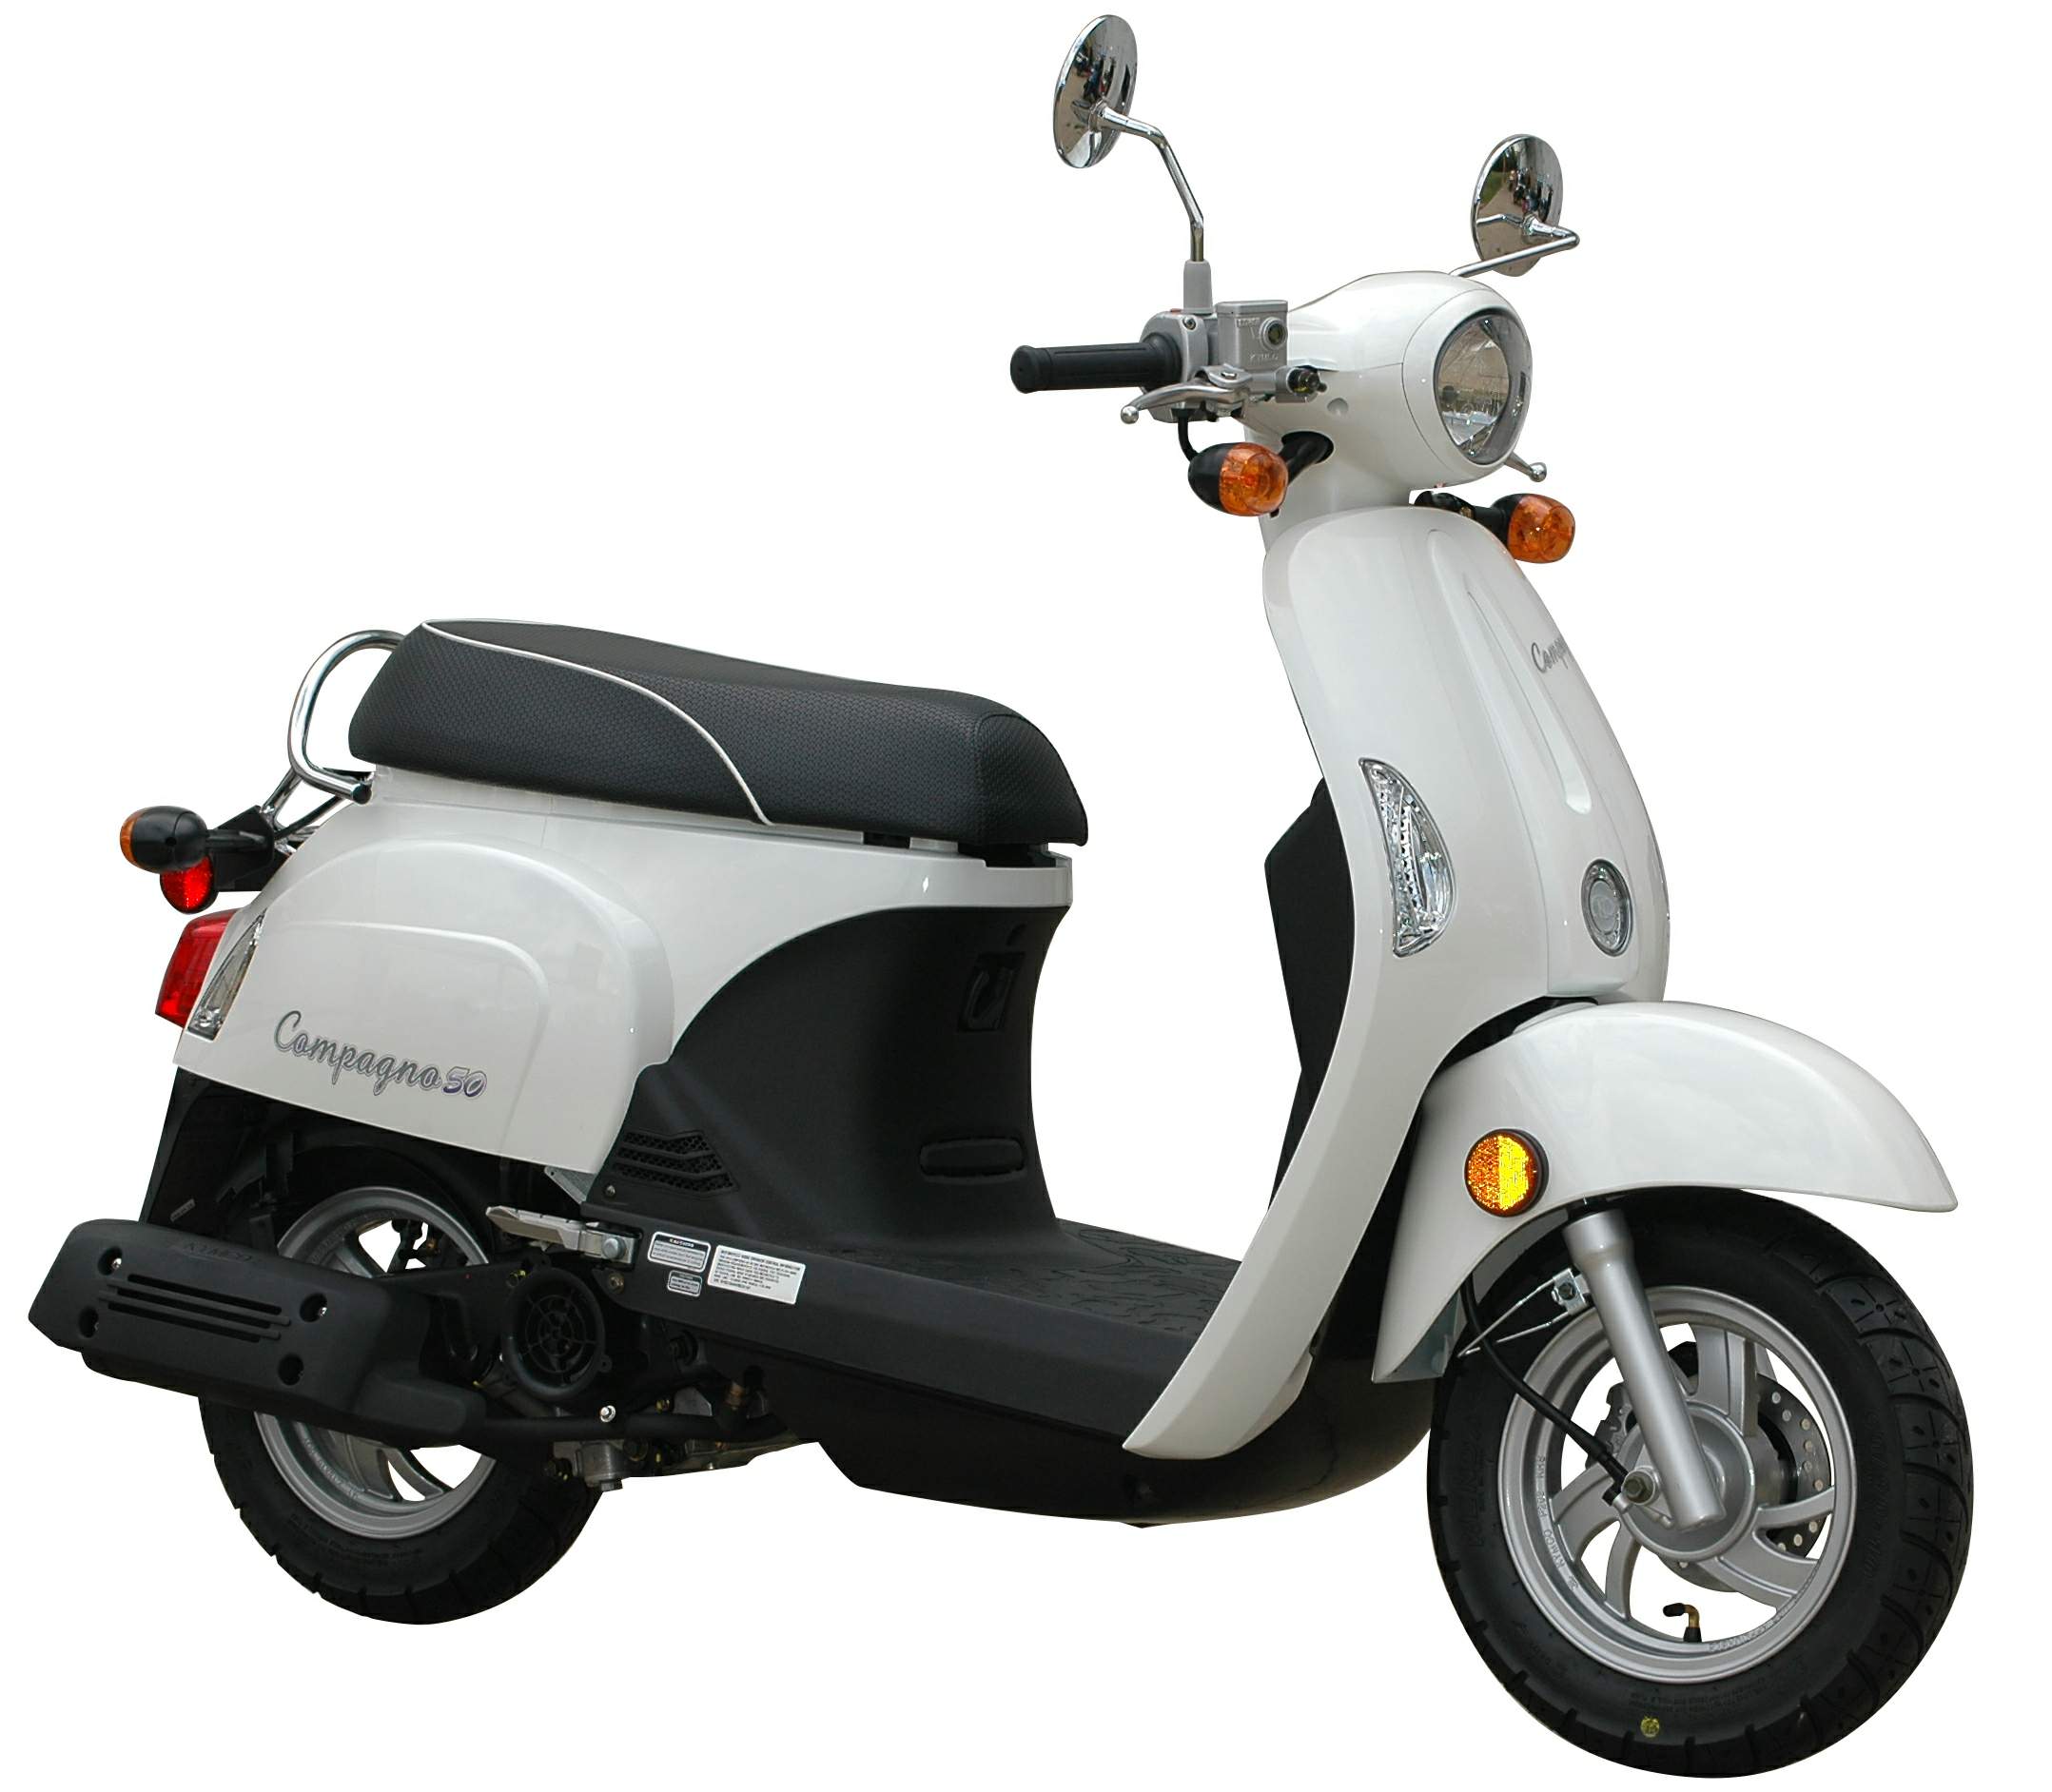 Kymco Compagno 50i For Sale Specifications, Price and Images